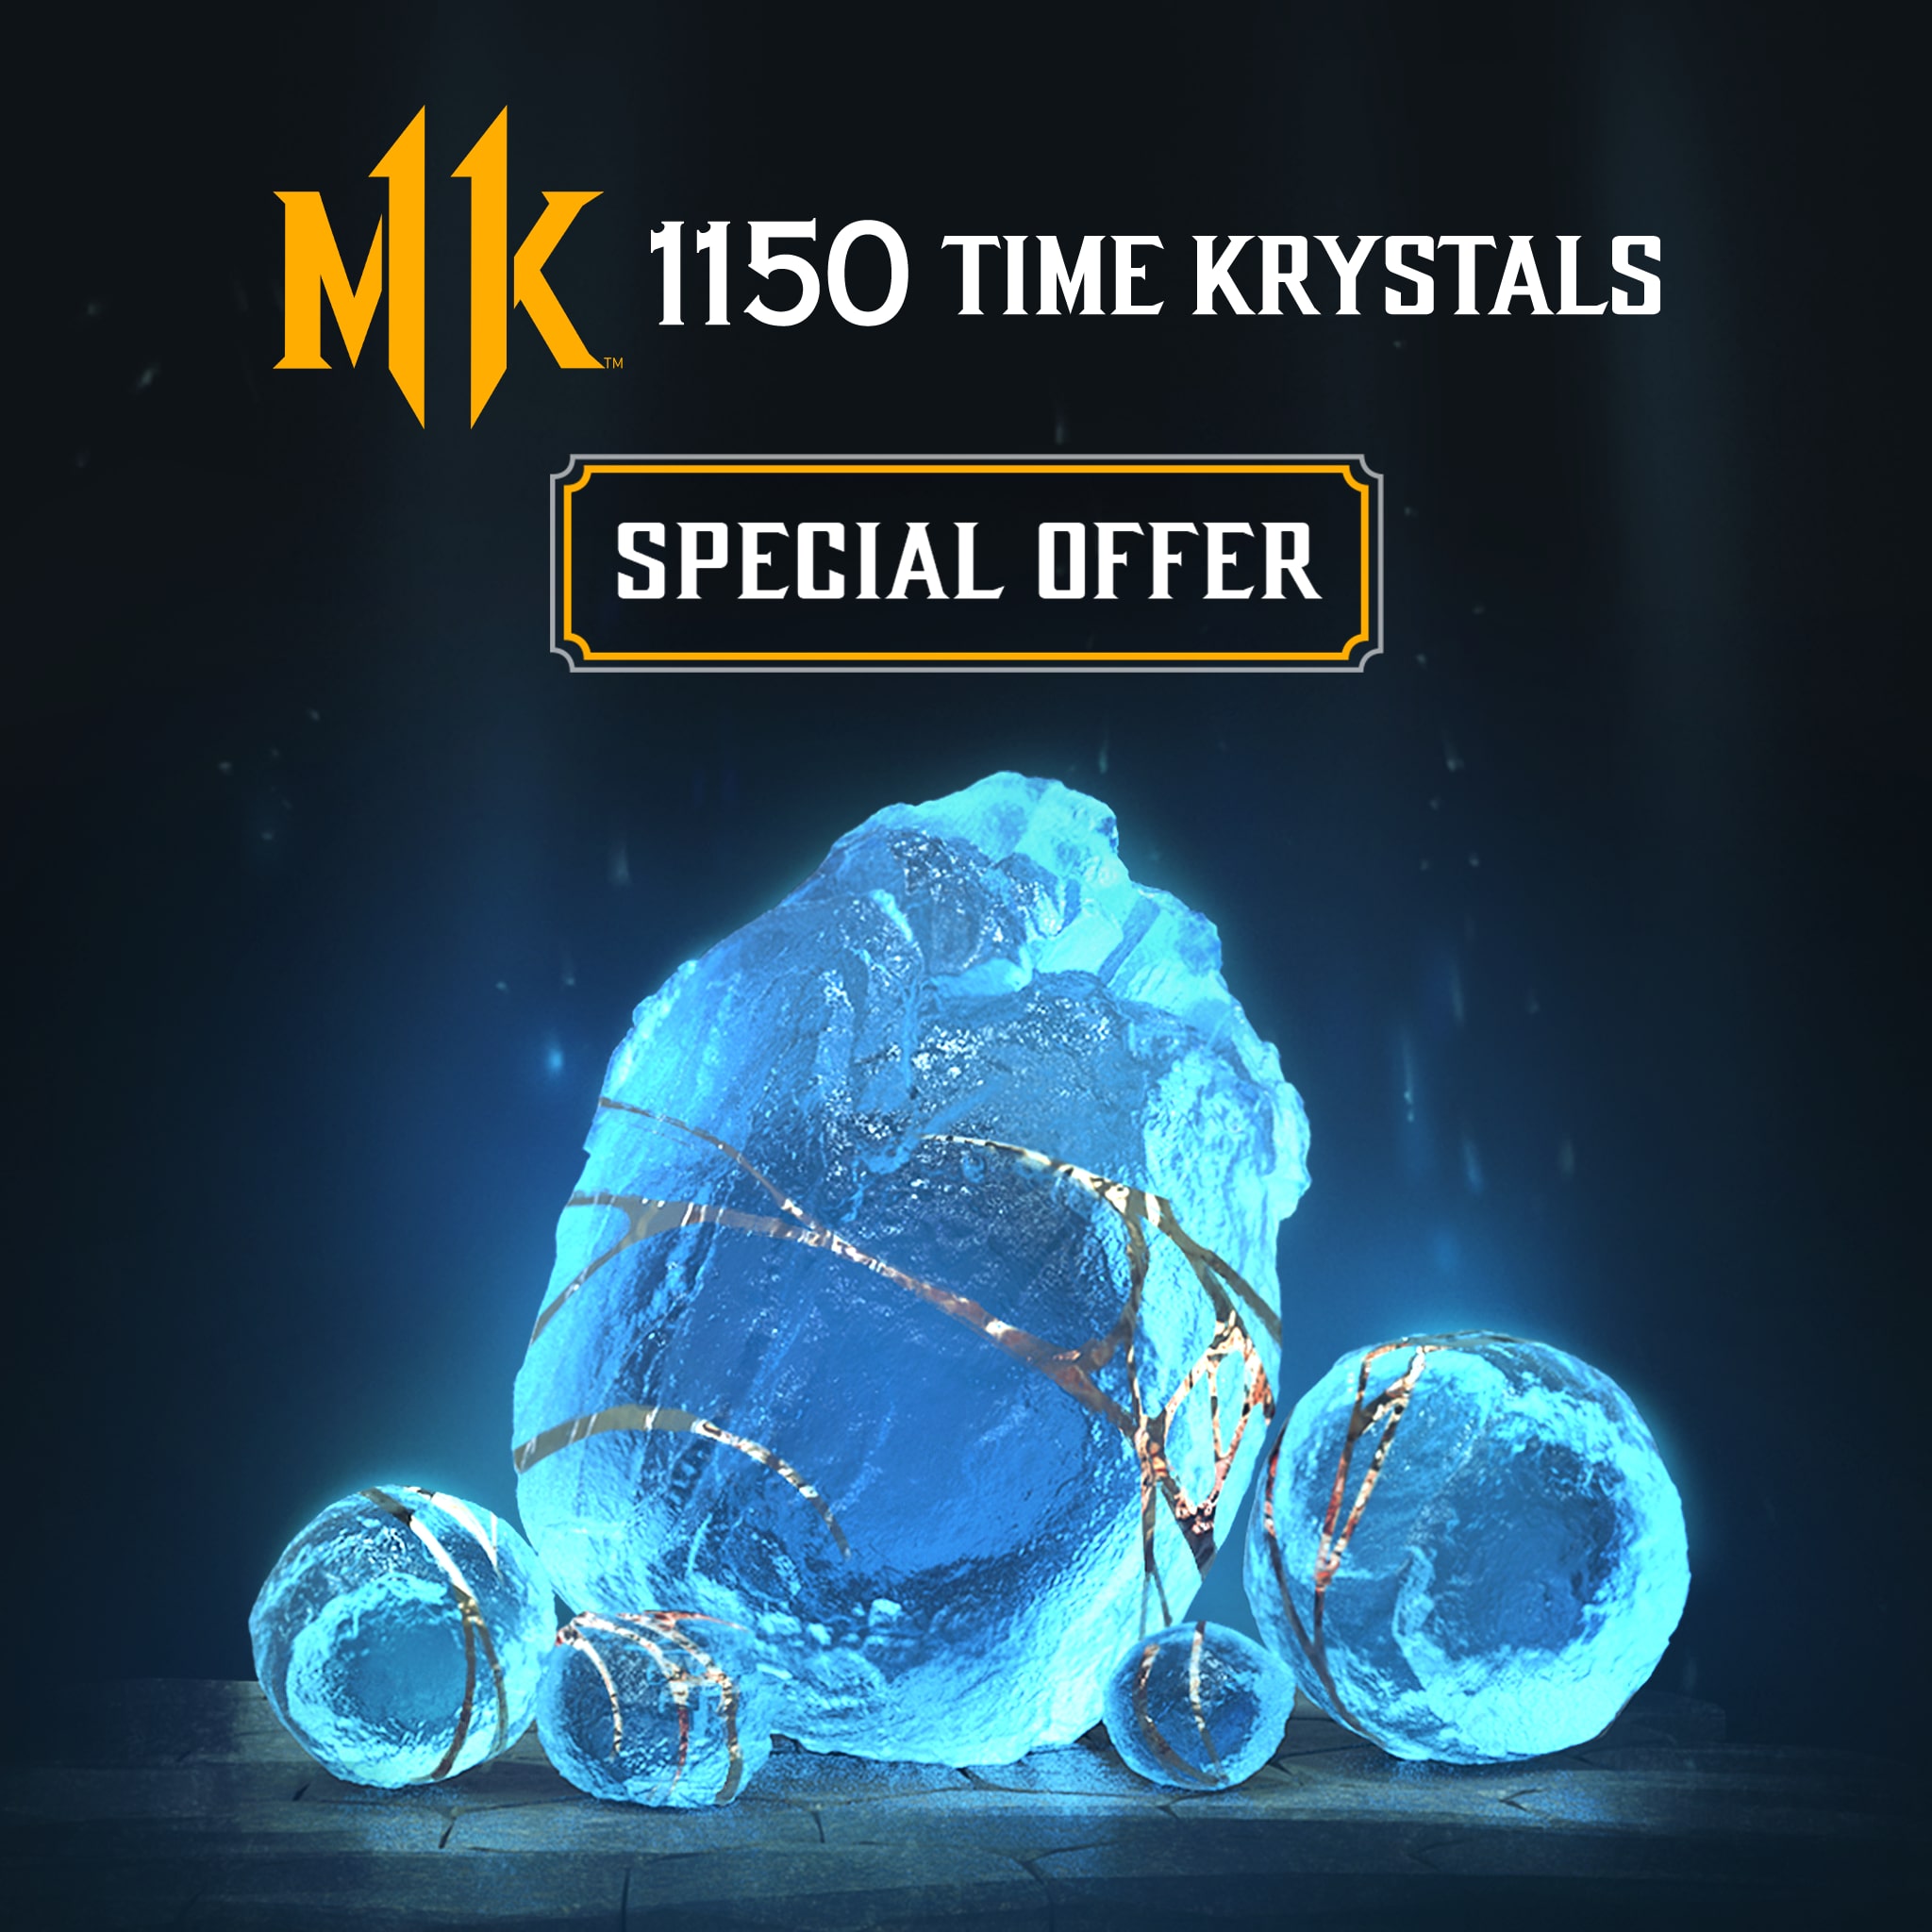 1150 Time Krystals - Special One Time Offer